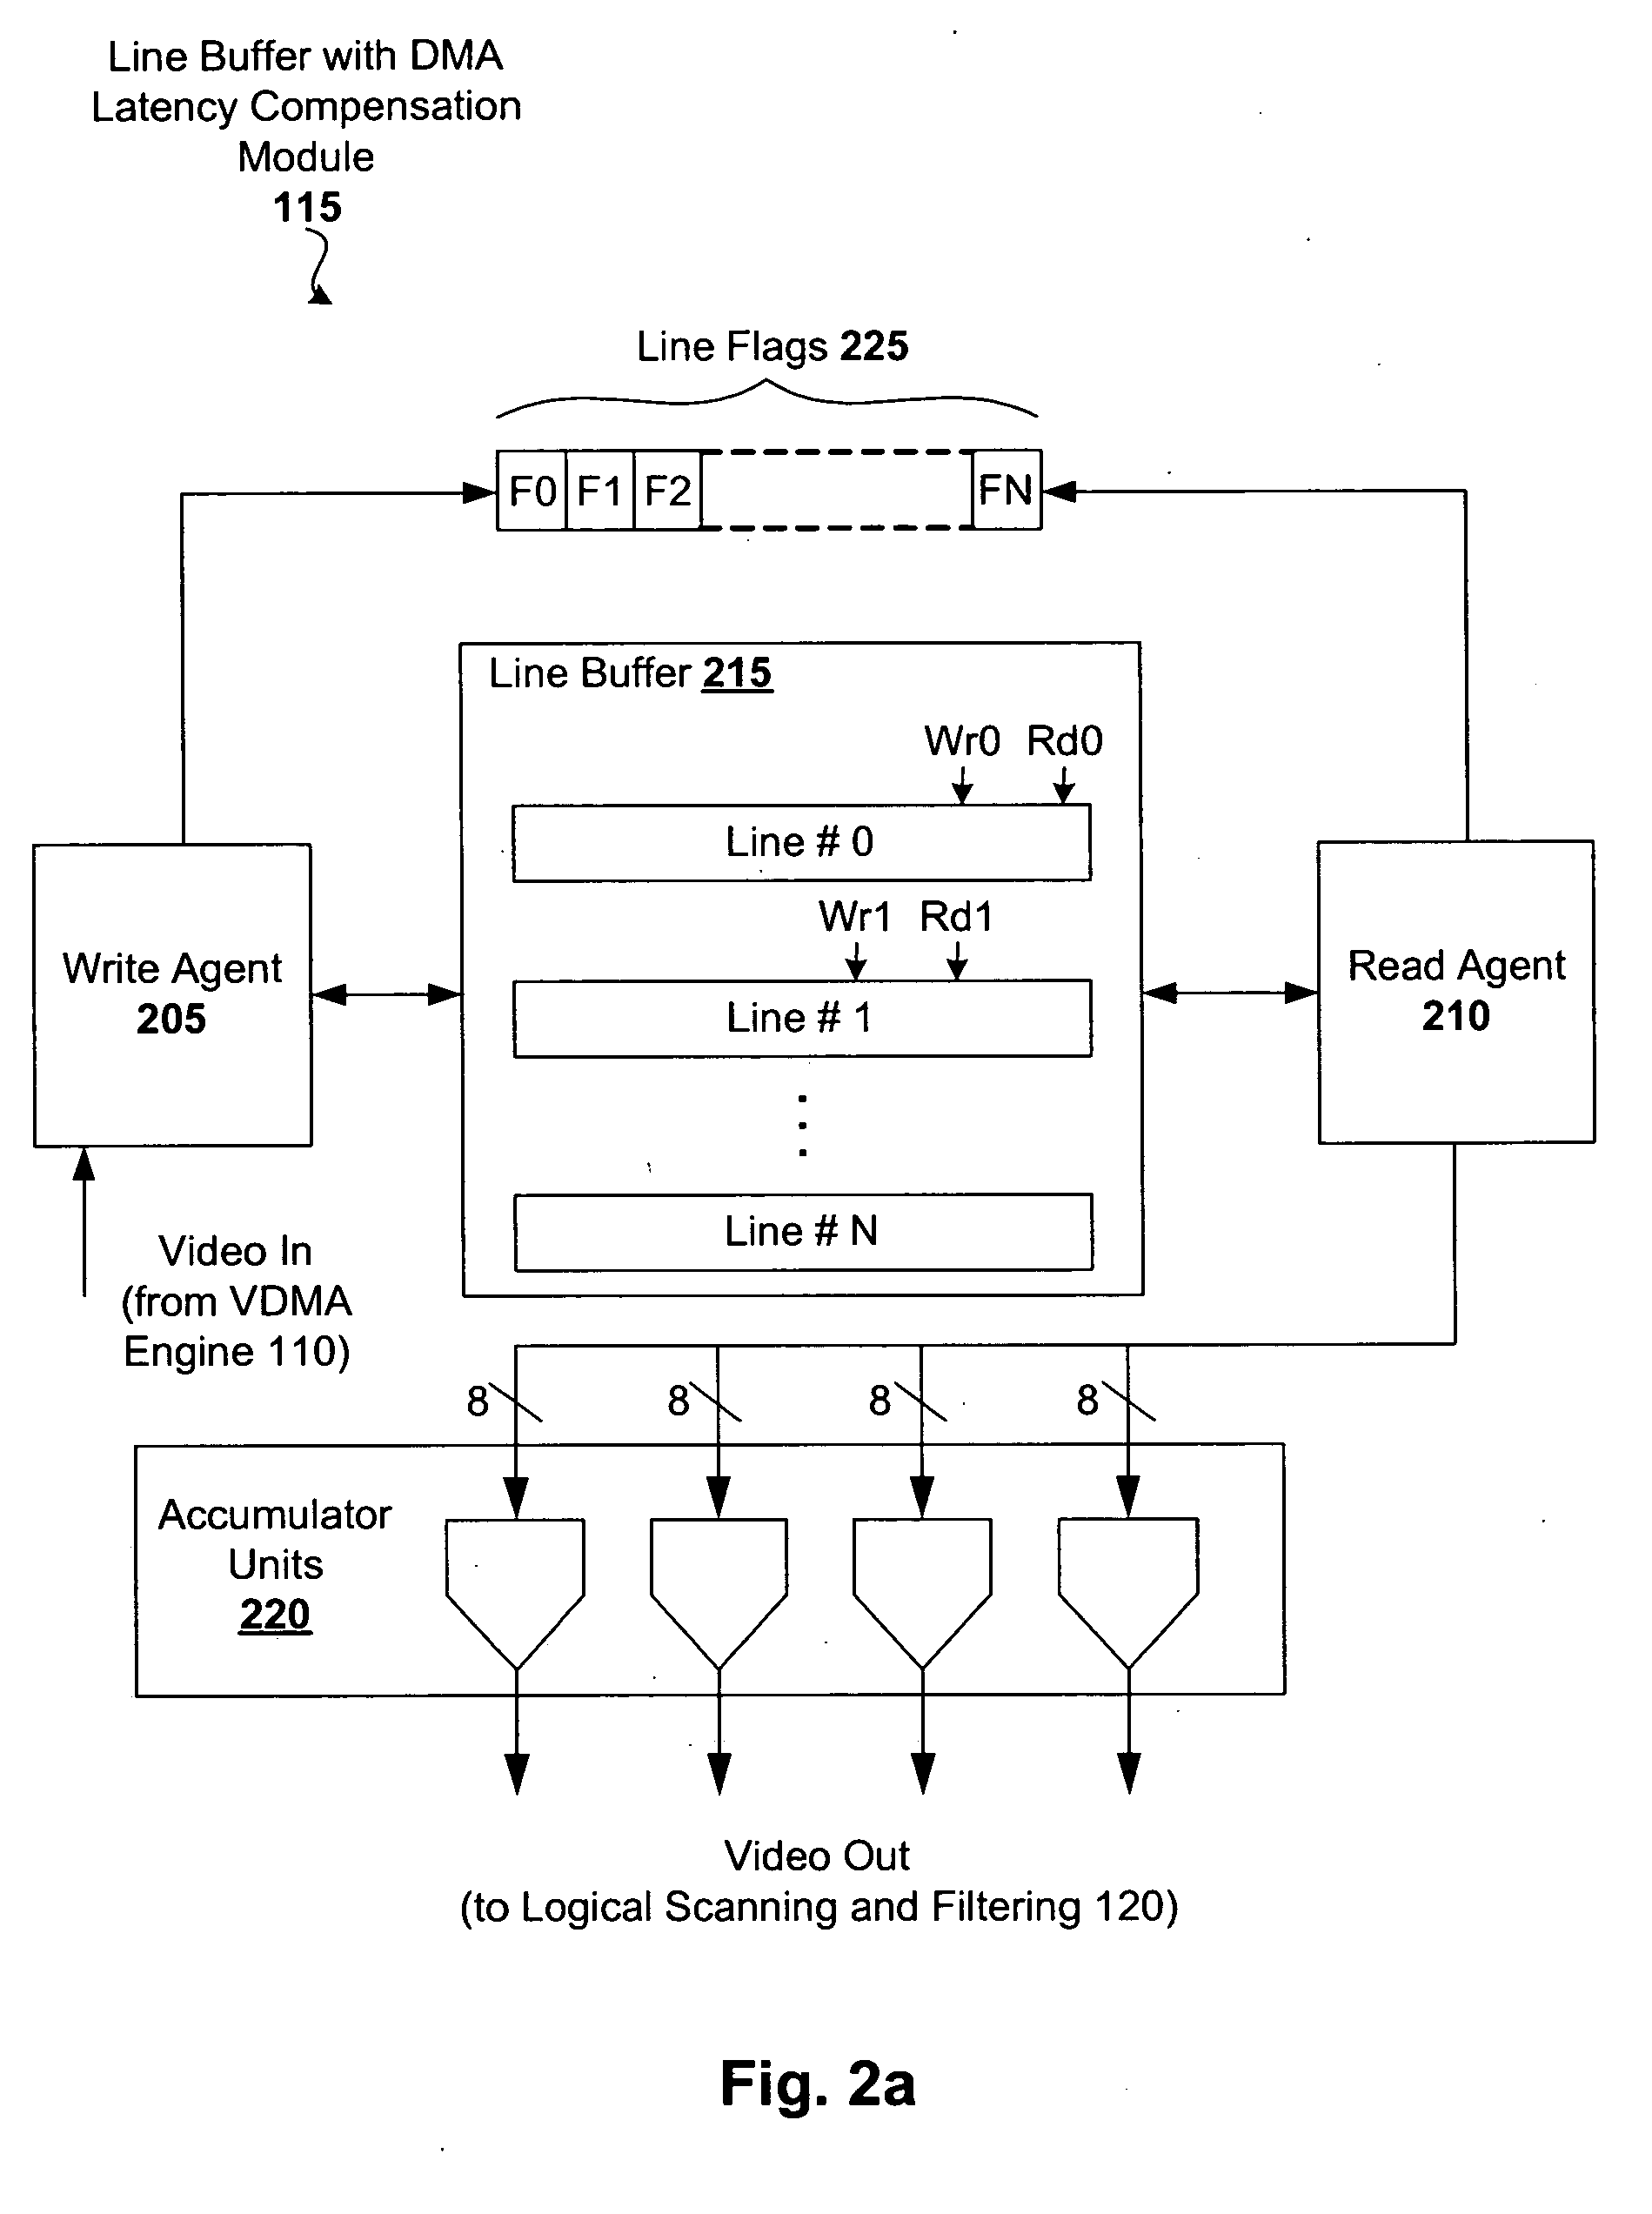 DMA latency compensation with scaling line buffer